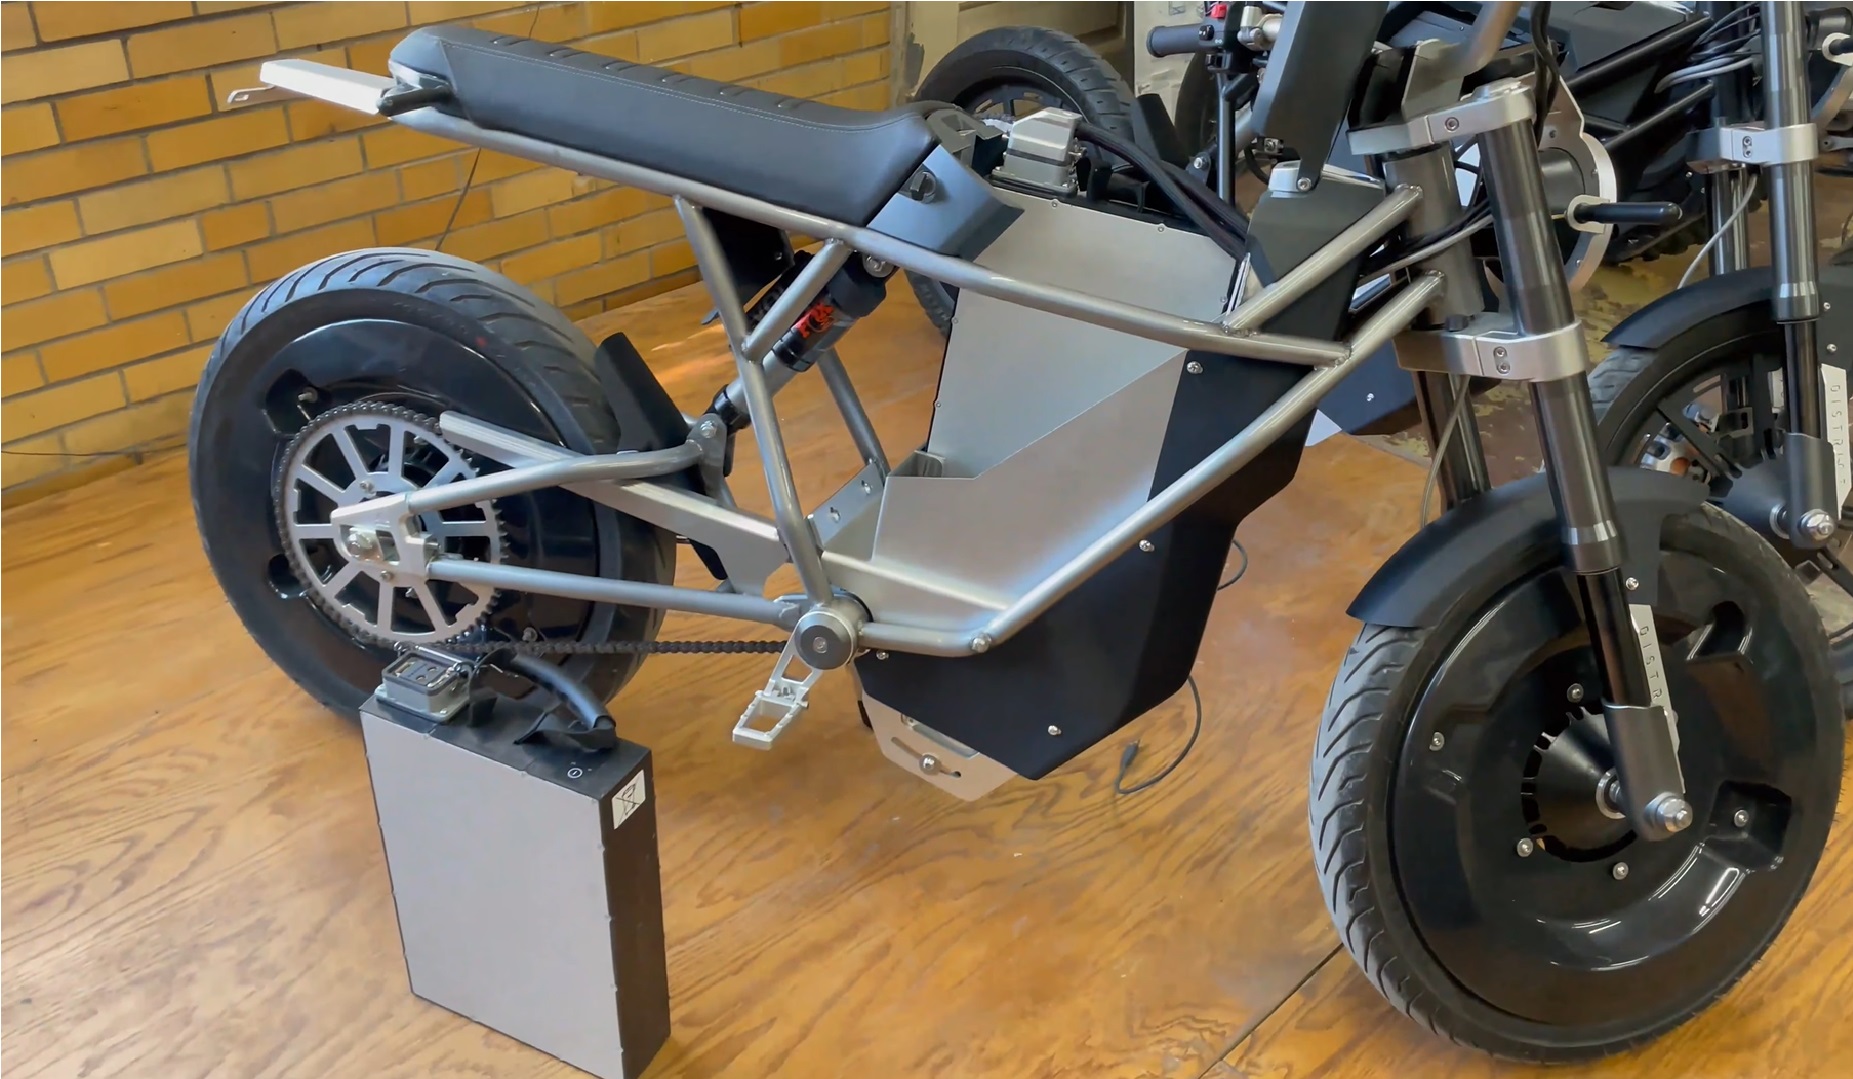 Removable battery from LAND electric motorcycle